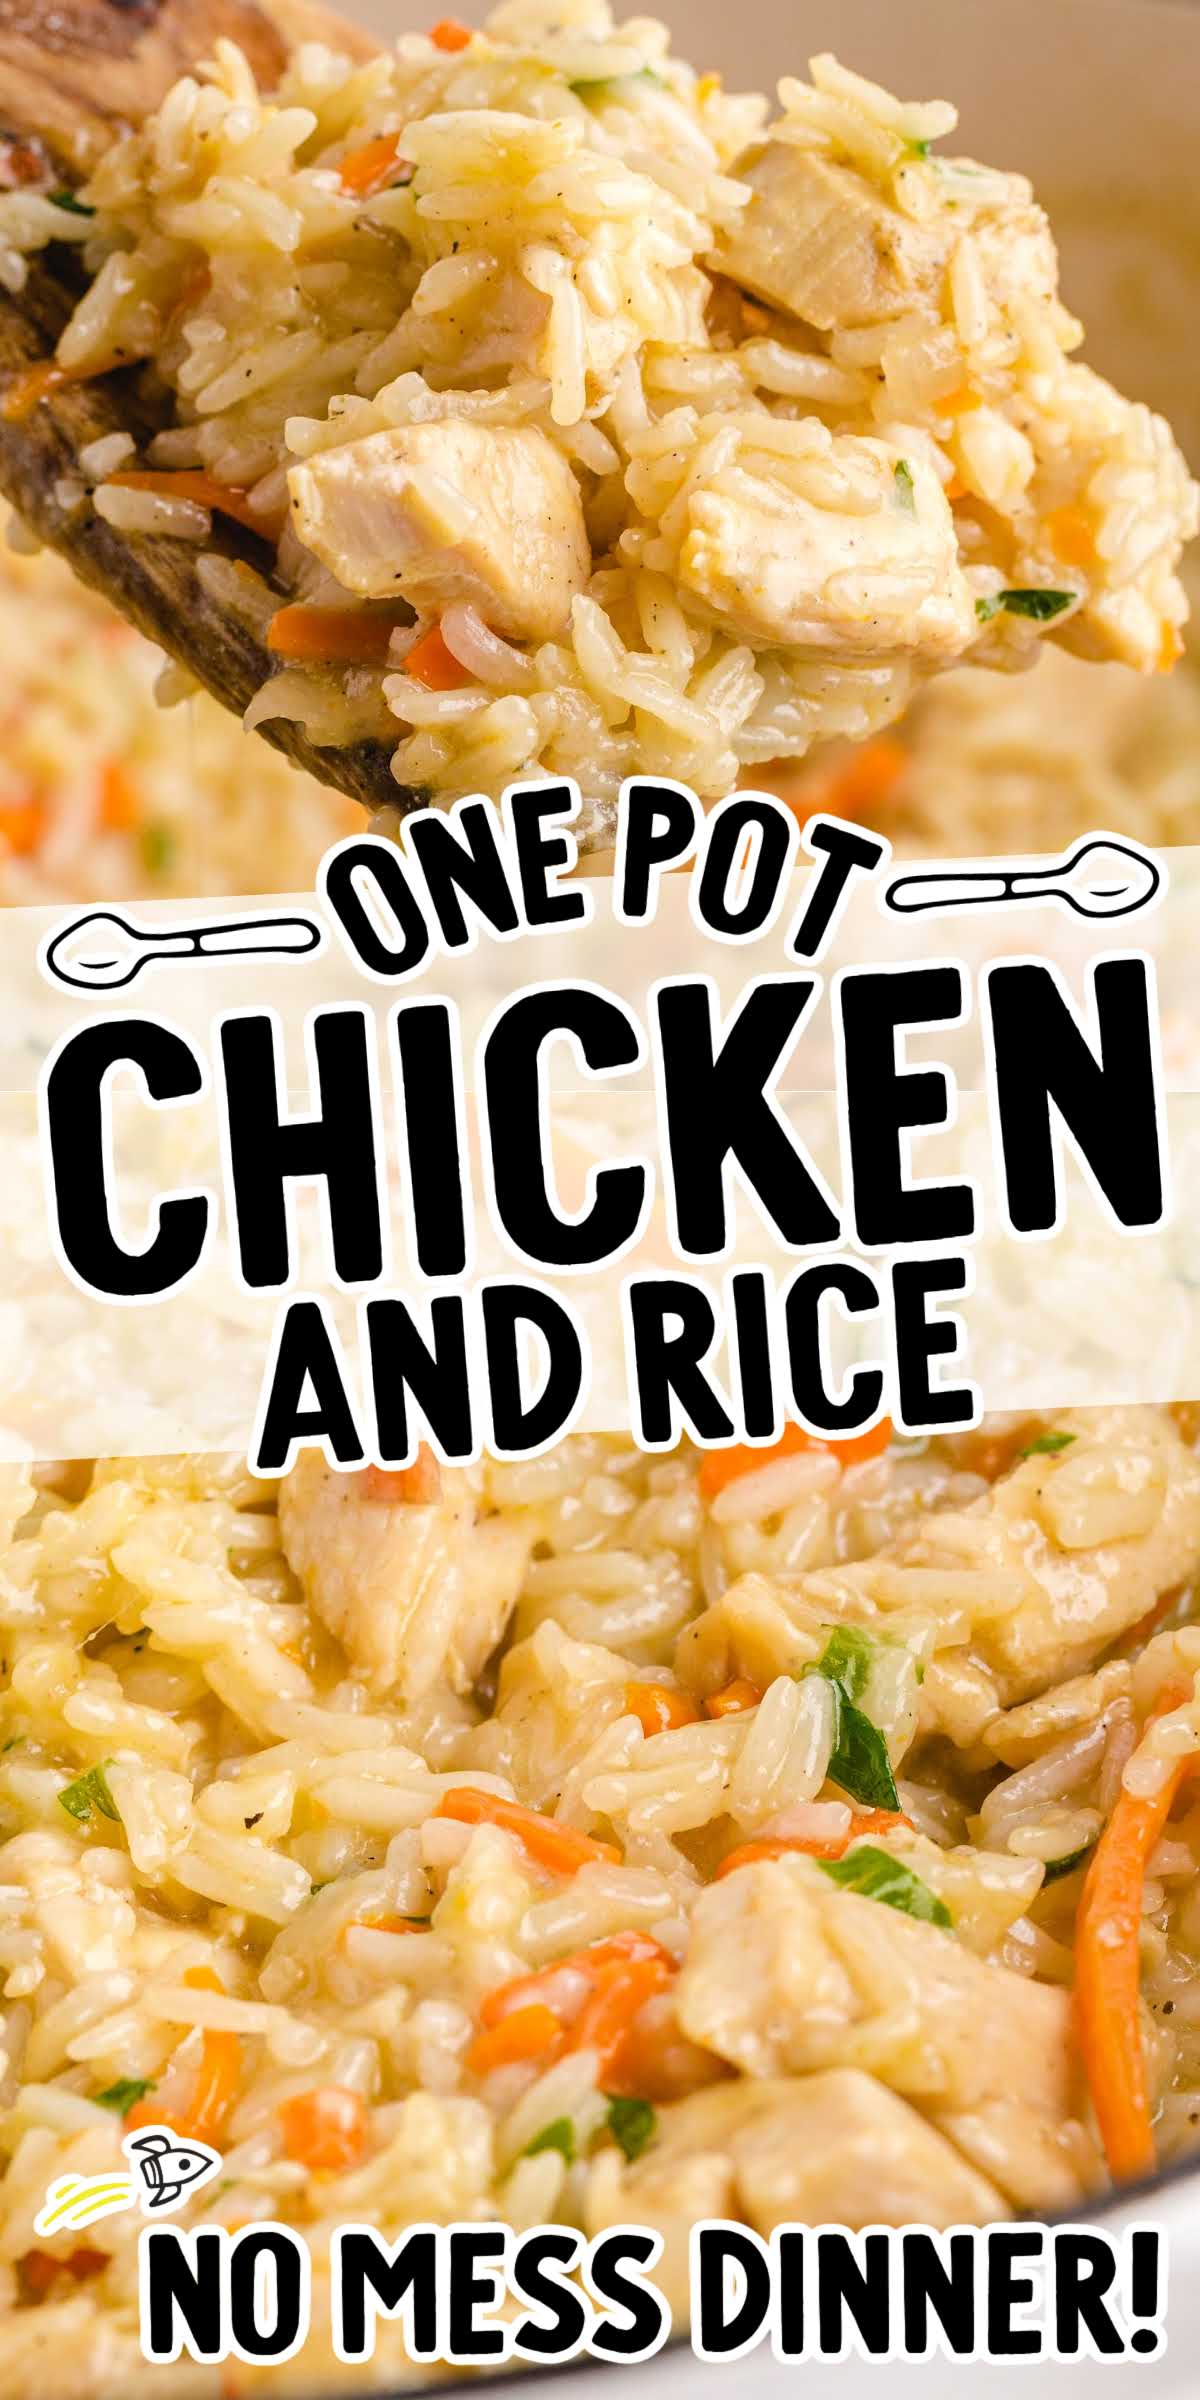 One Pot Chicken and Rice Recipe - Spaceships and Laser Beams